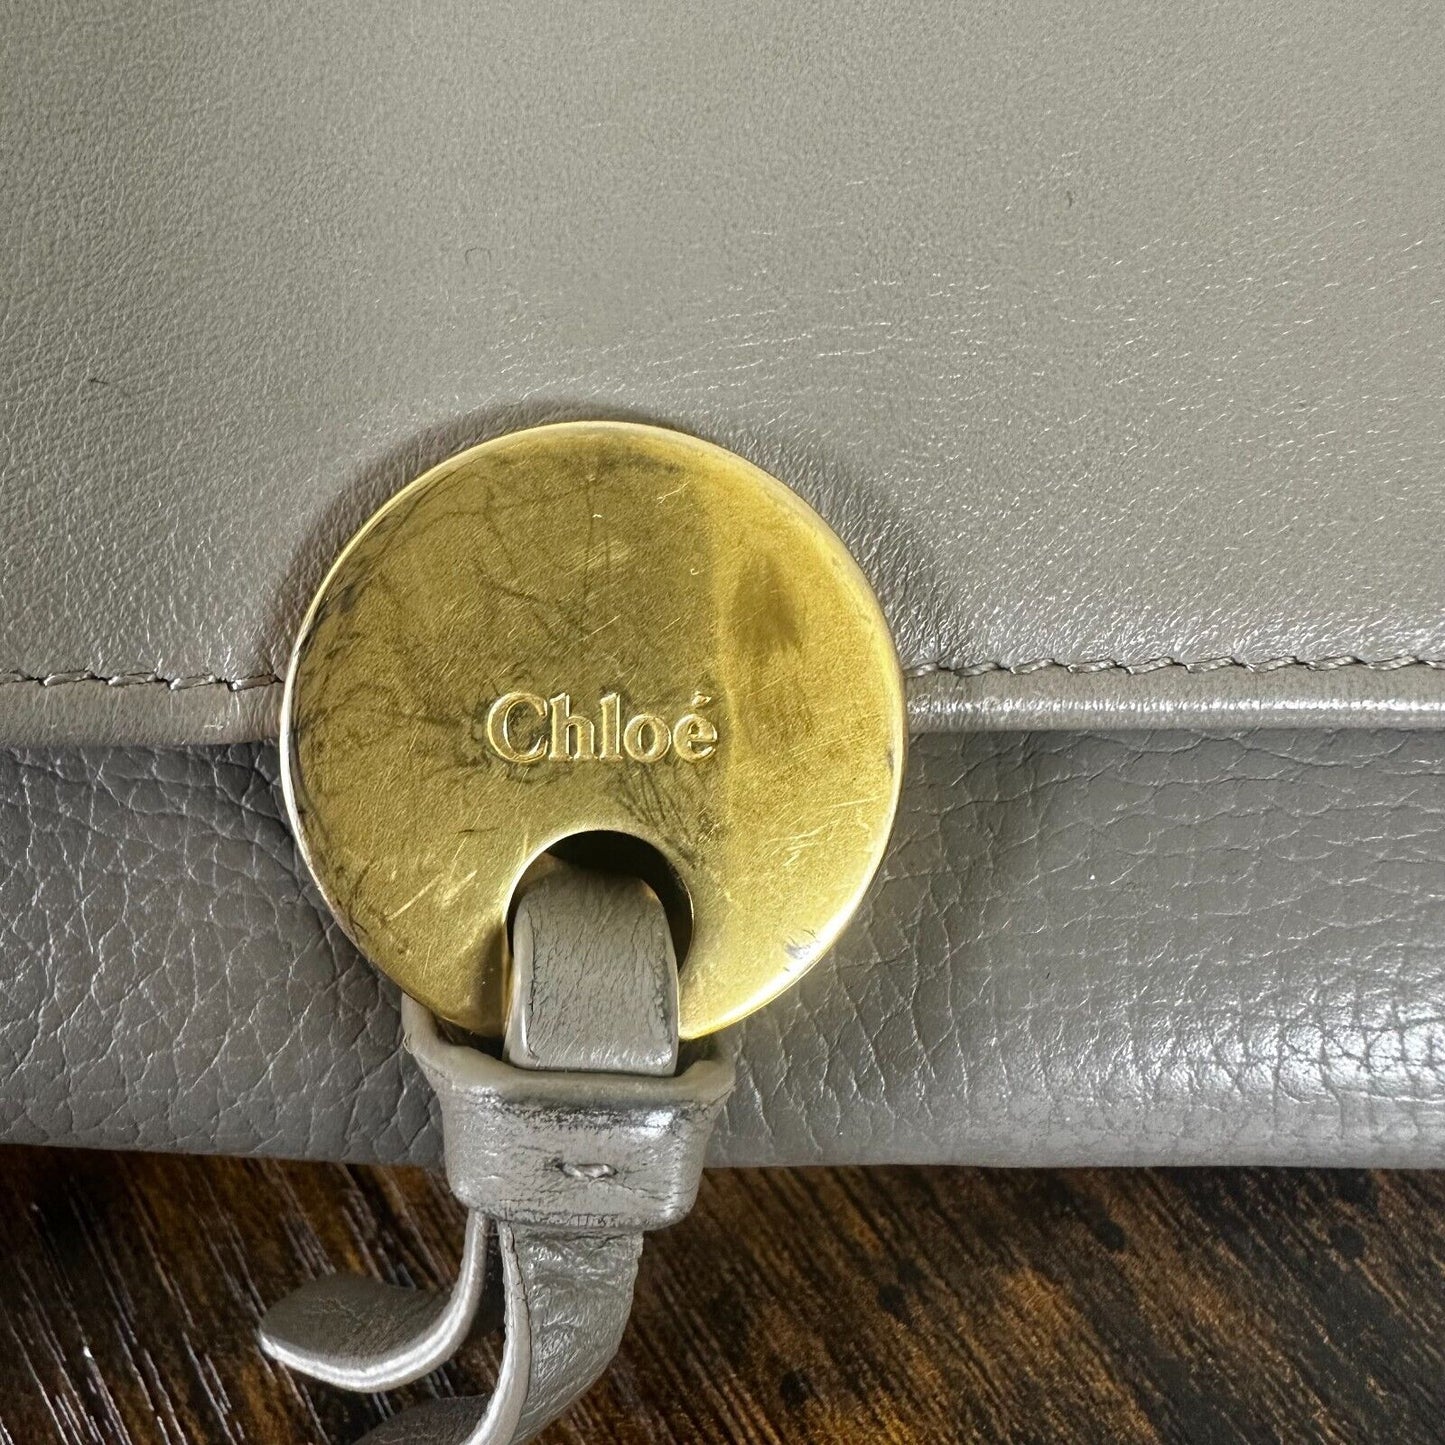 Chloe Indy Long Wallet With Flap Gray Leather W/ Certificate Of Authenticity